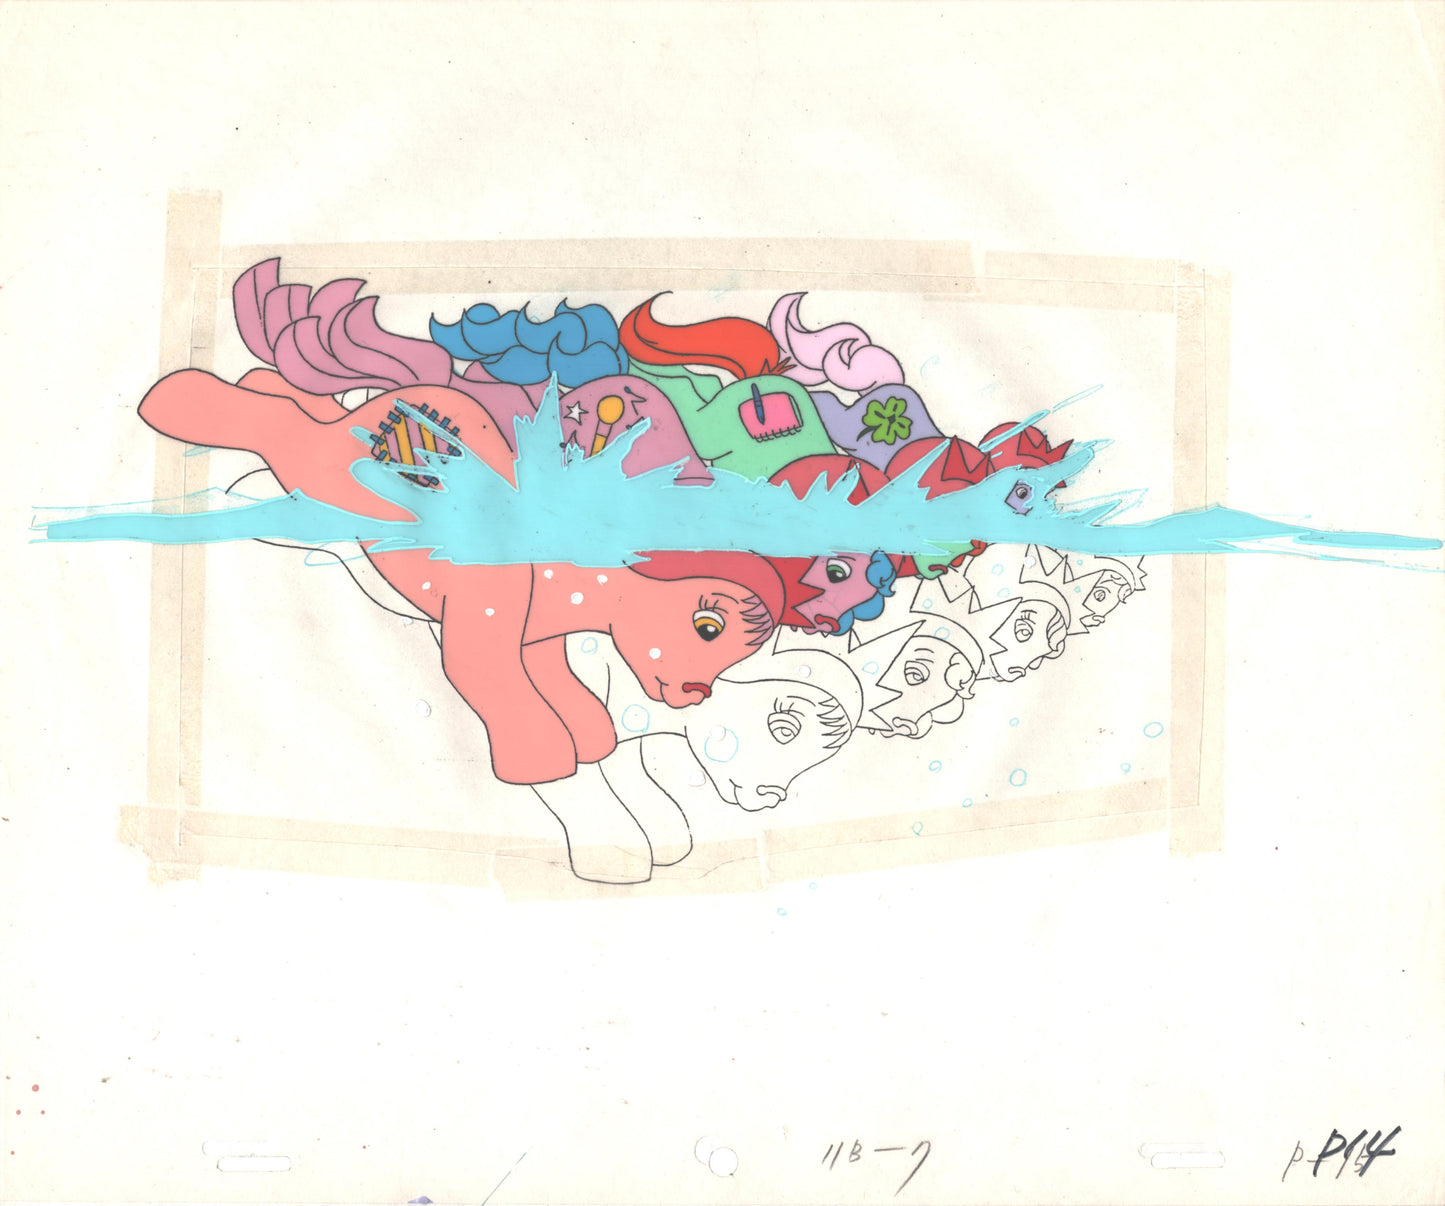 My Little Pony Original Production Animation Cel Hasbro Sunbow 1980s or 90s Used to Make the Cartoon J-P14